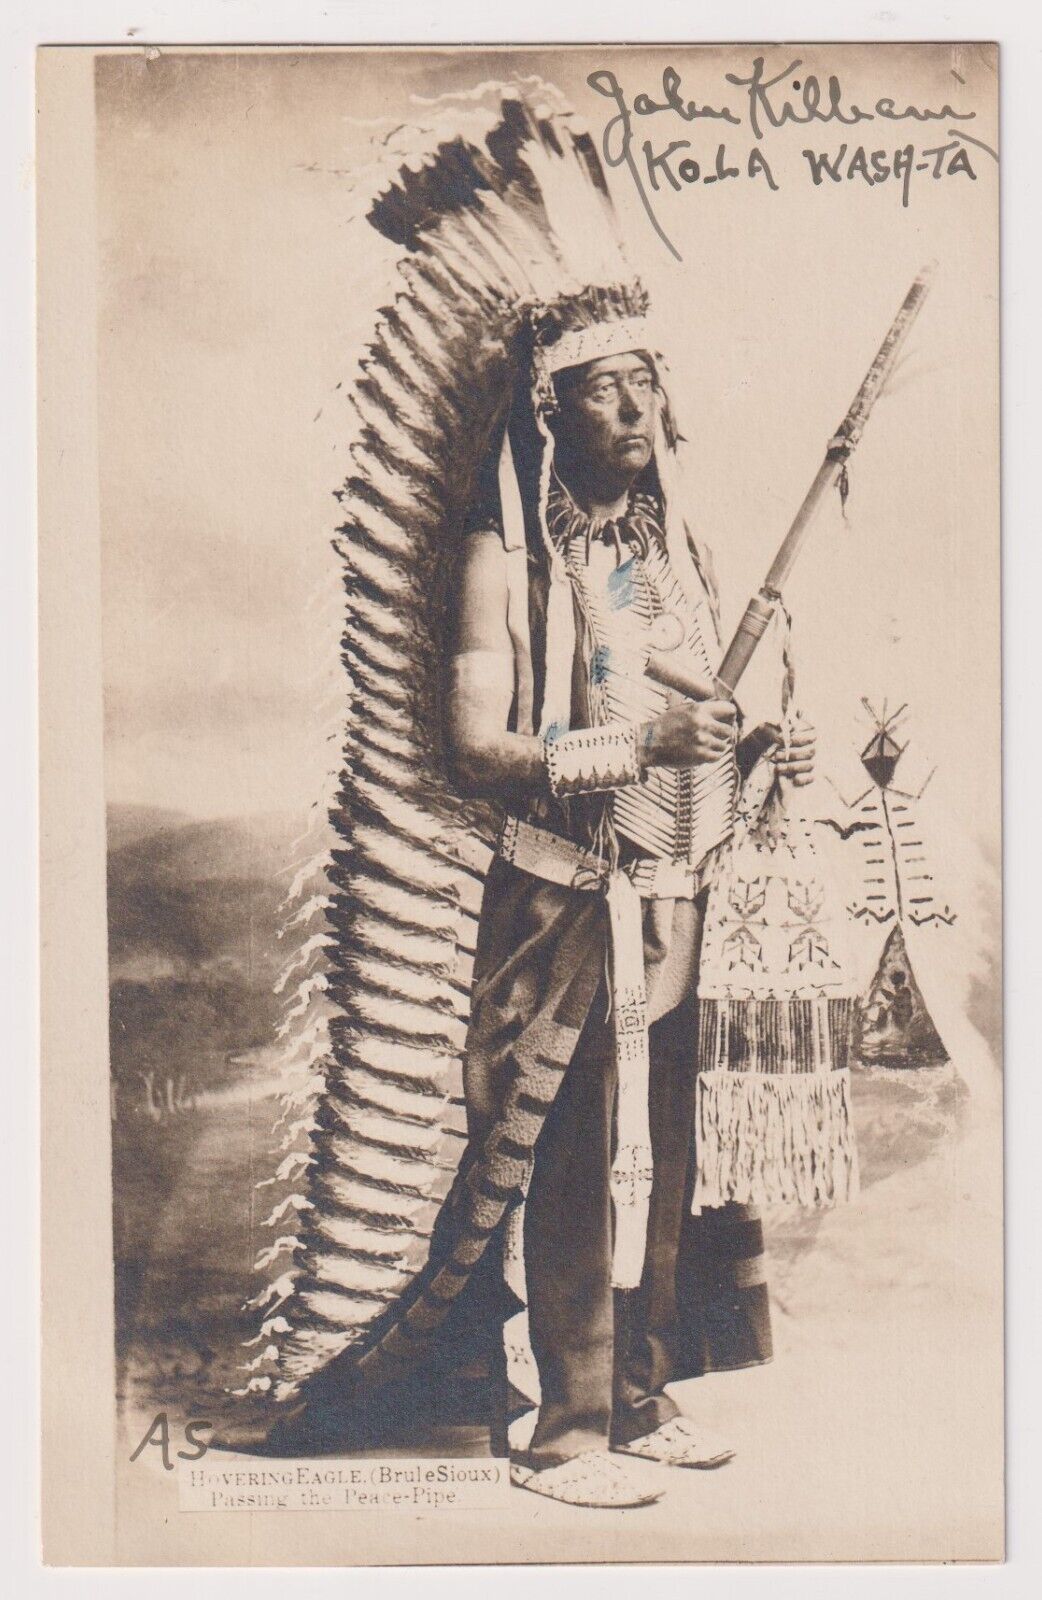 RPPC Postcard John Kilham Impersonating Indian Chief Hovering Eagle Passing Pipe